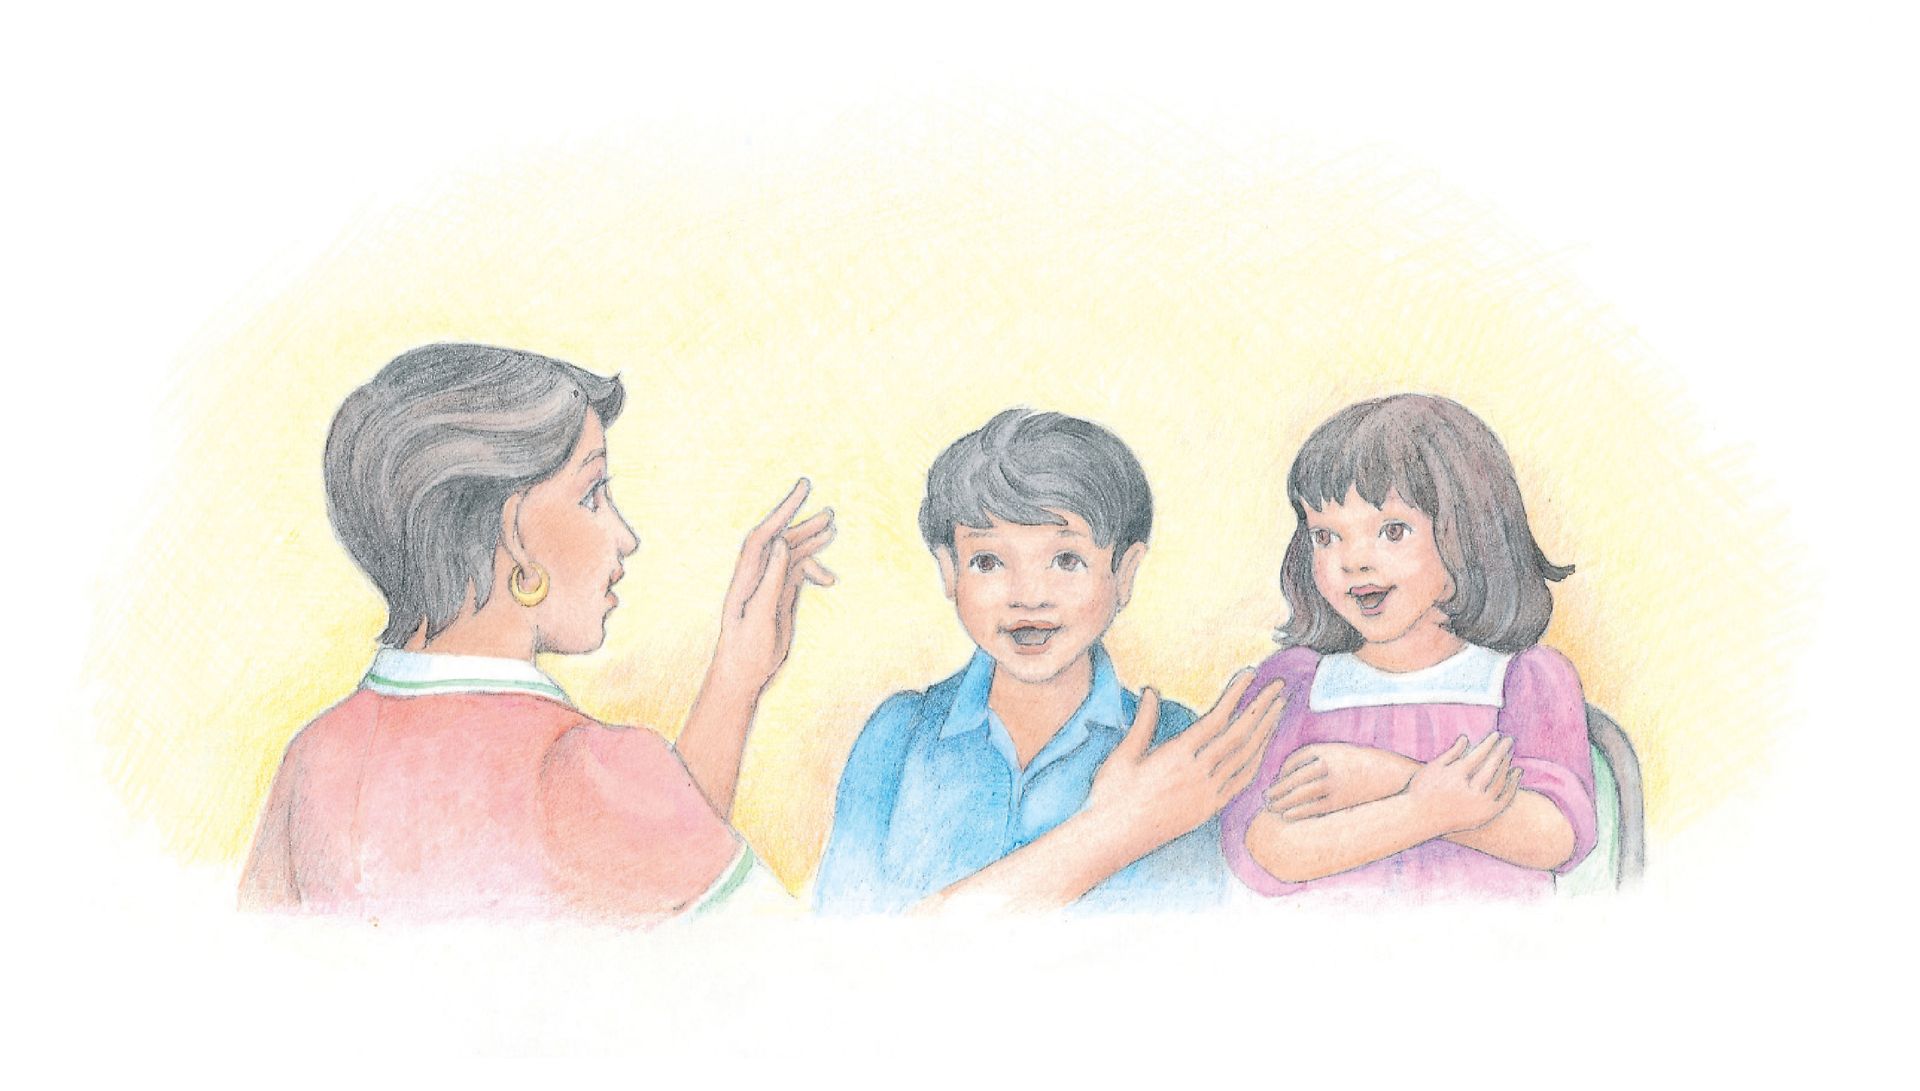 Two singing children being led by a woman. From the Children’s Songbook, page 26, “Reverently, Quietly”; watercolor illustration by Phyllis Luch.